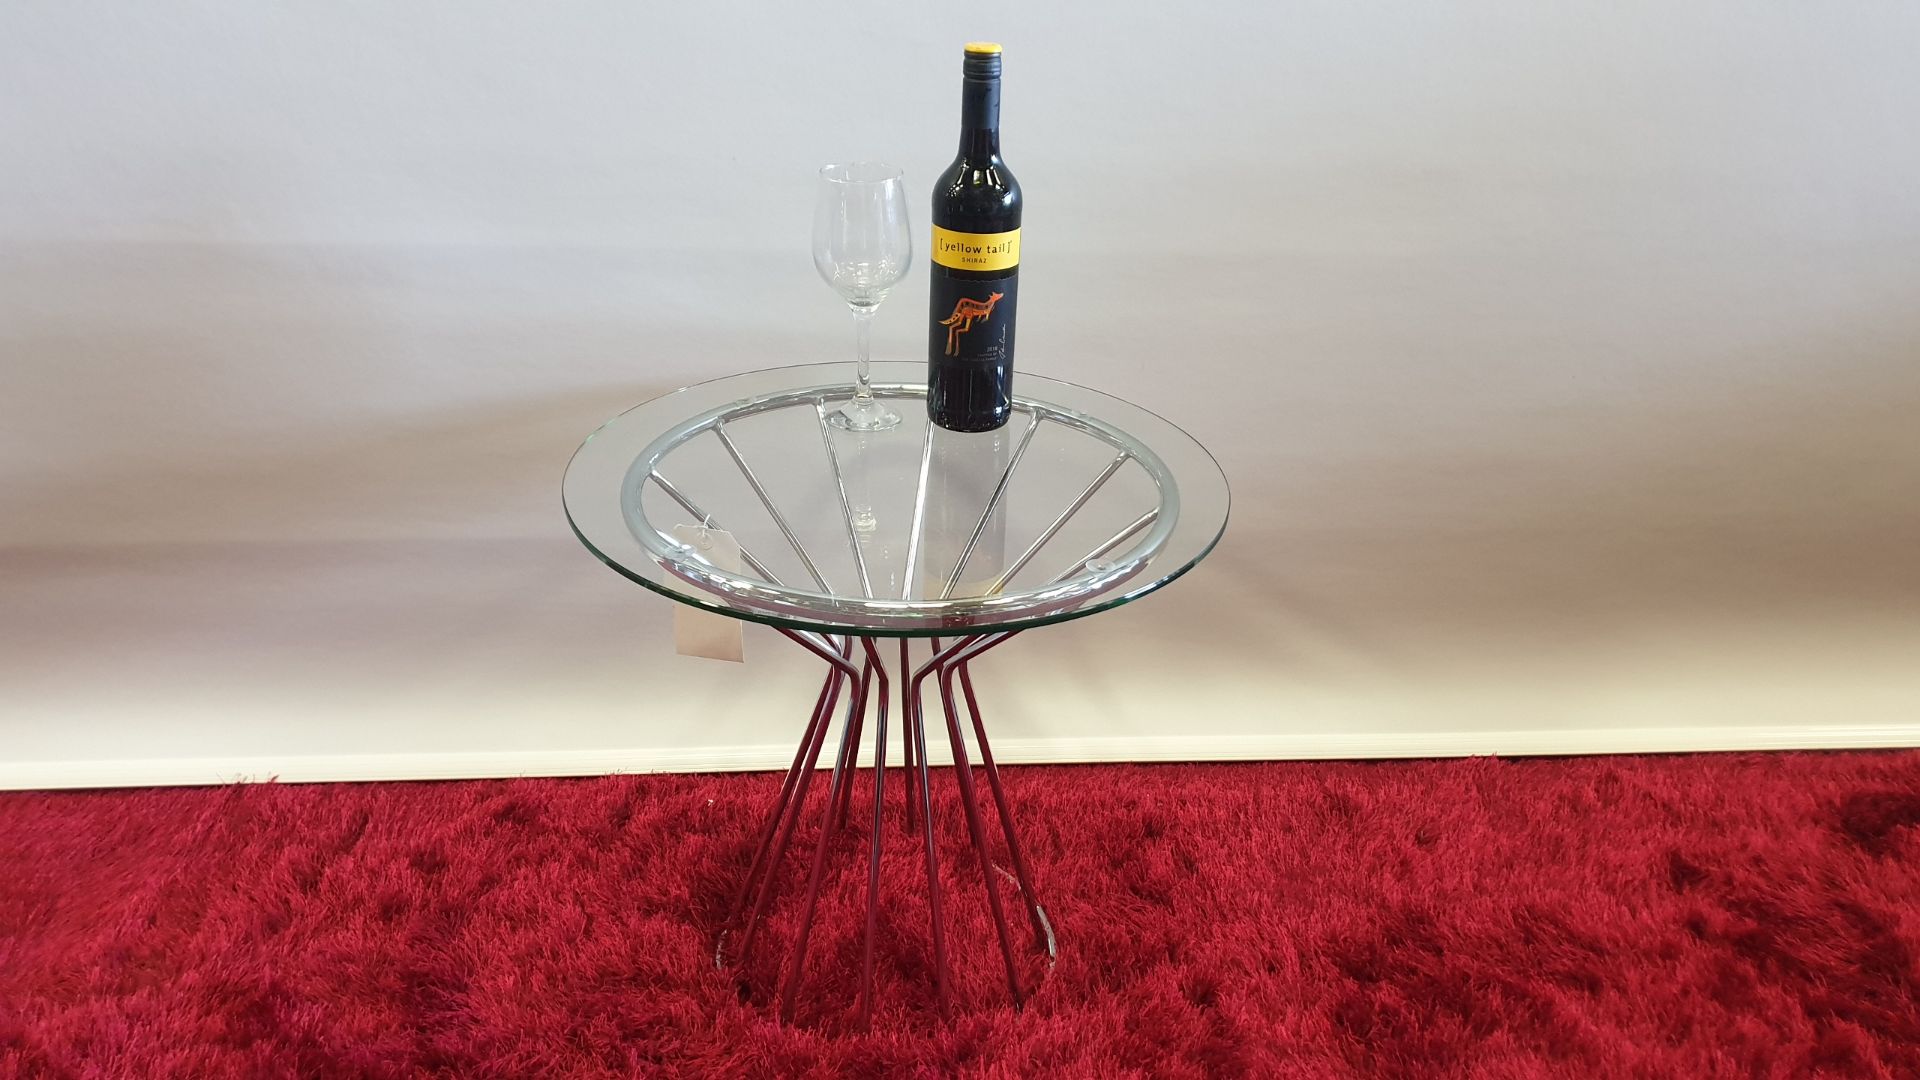 BRAND NEW CHROME CLEAR GLASS SIDE TABLE SIZE 520 MM DIAMETER / HEIGHT 500 MM RRP £169.00